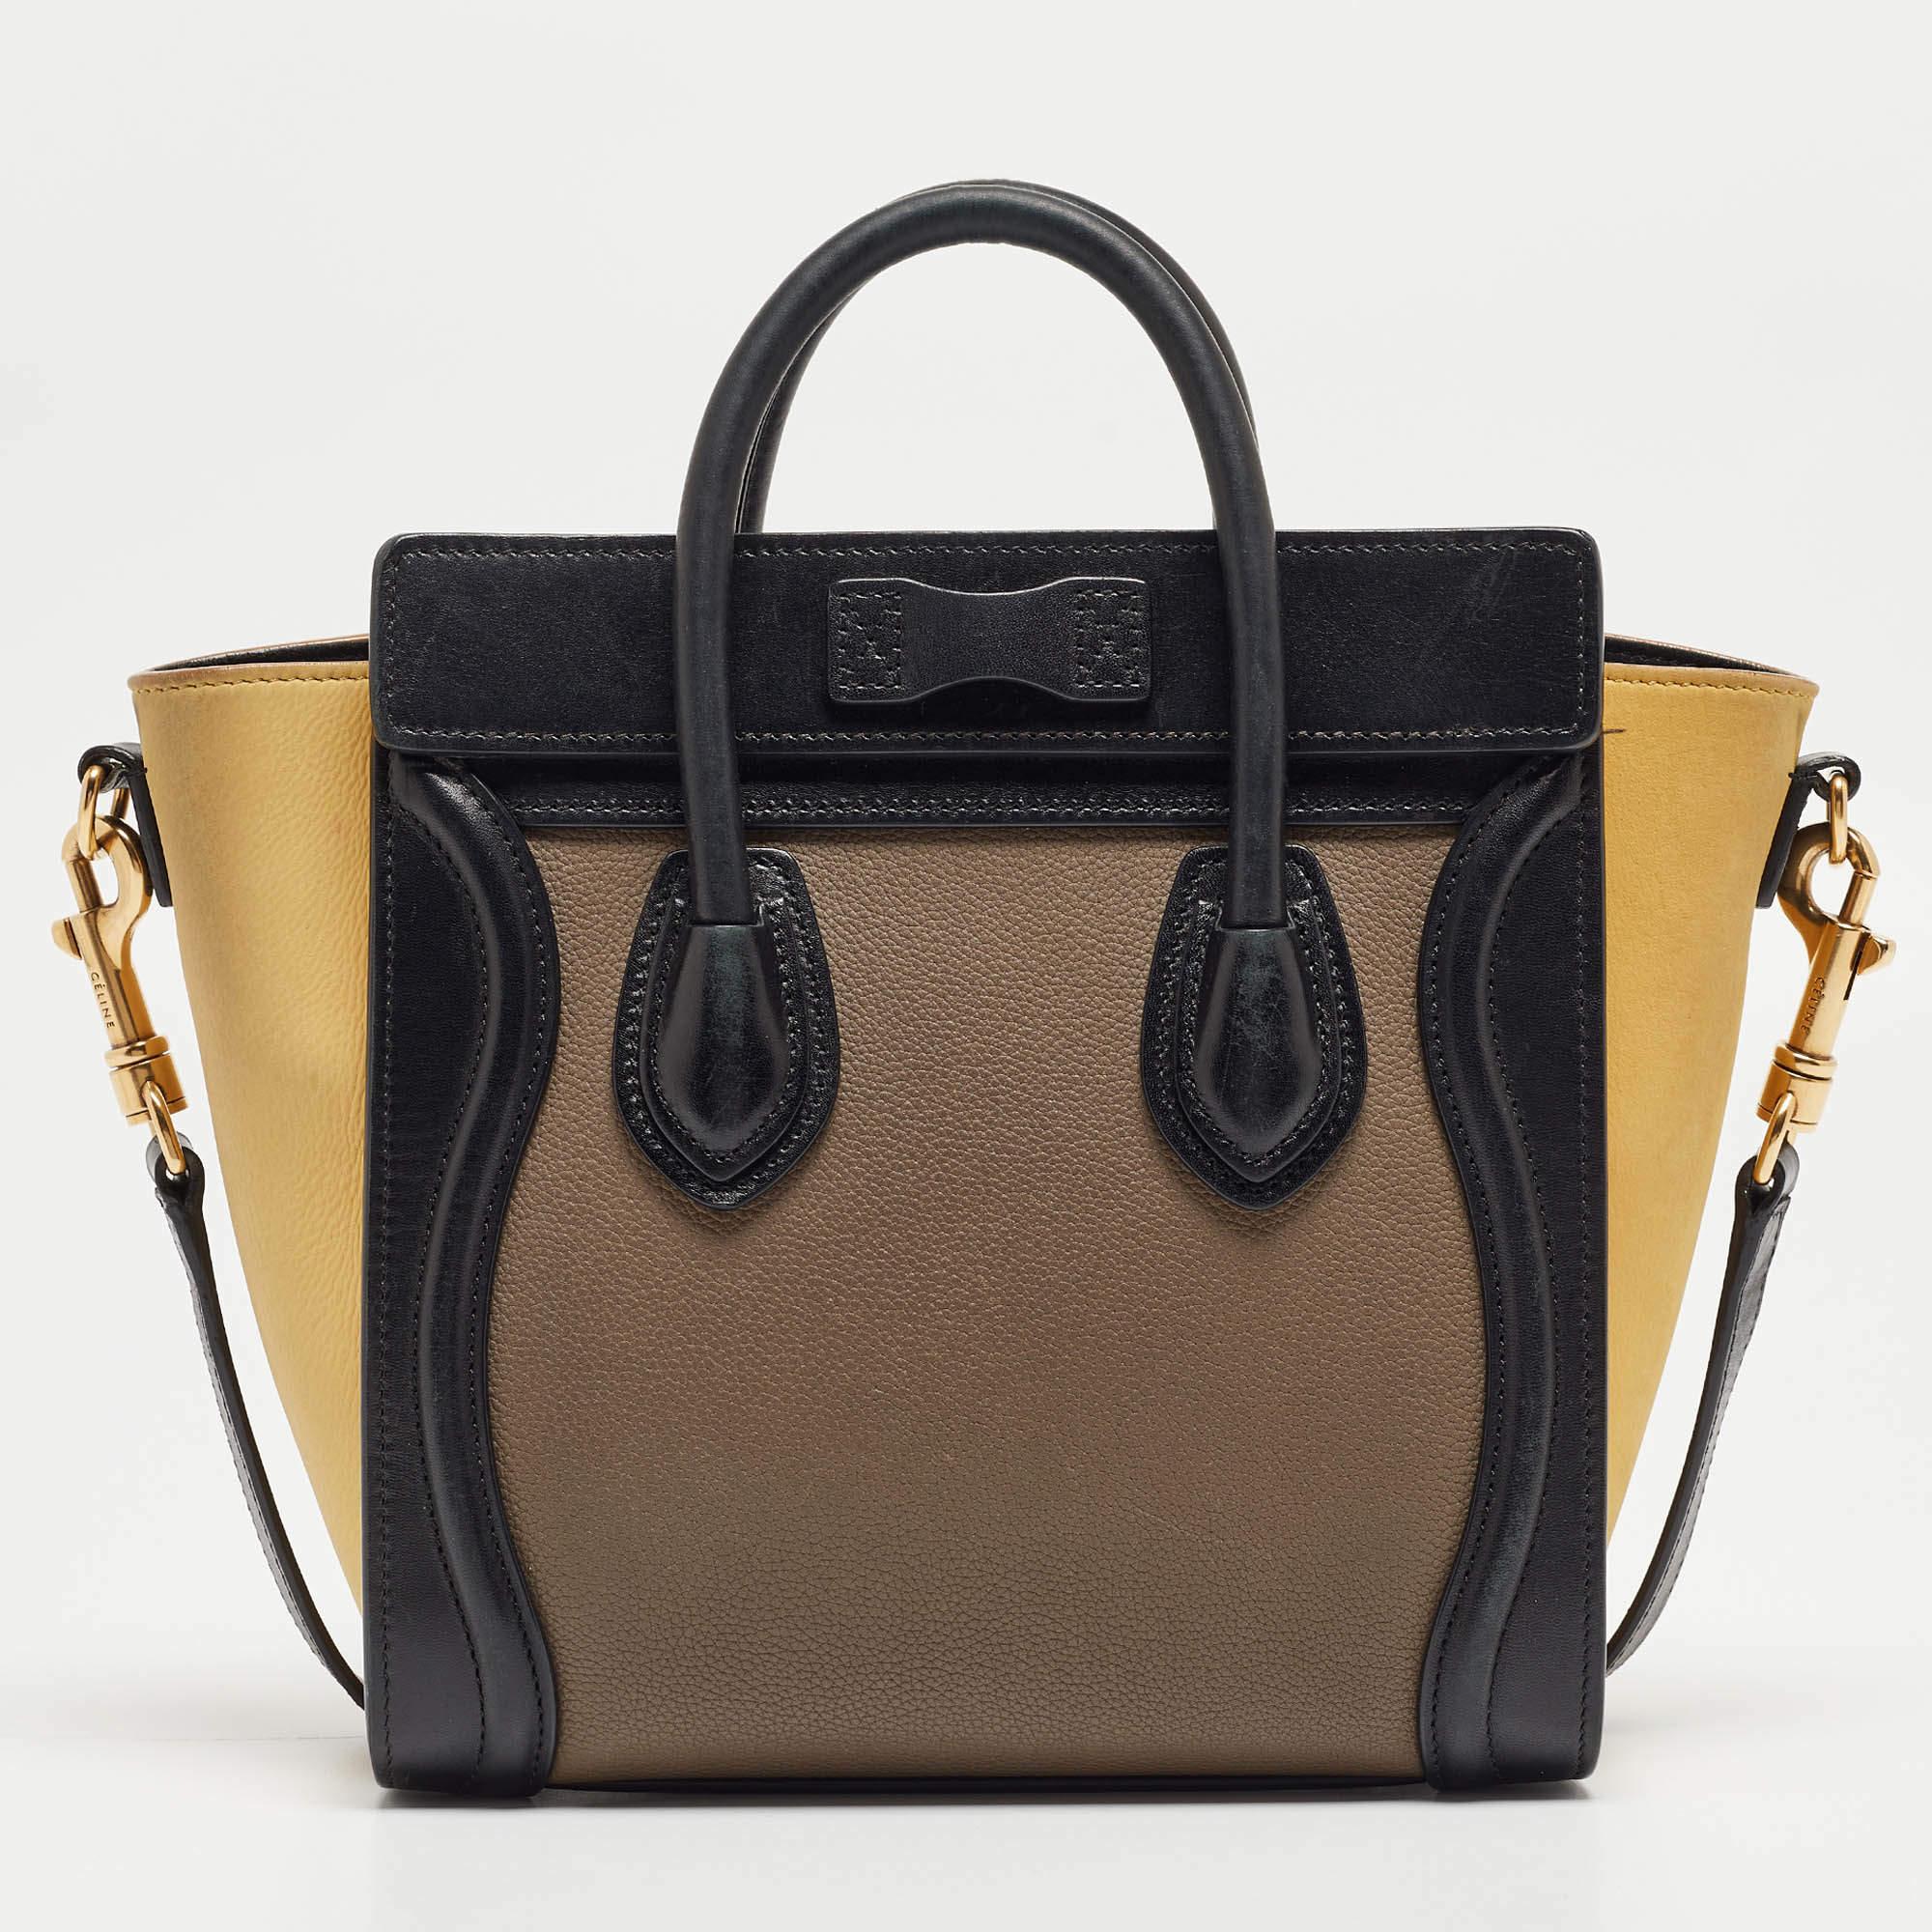 The Nano Luggage tote is from one of the most loved collections from the House of Céline. This tote serves not just as a luxurious style element but also acts as a luxe alternative to carry all your belongings. Its exterior displays nubuck and